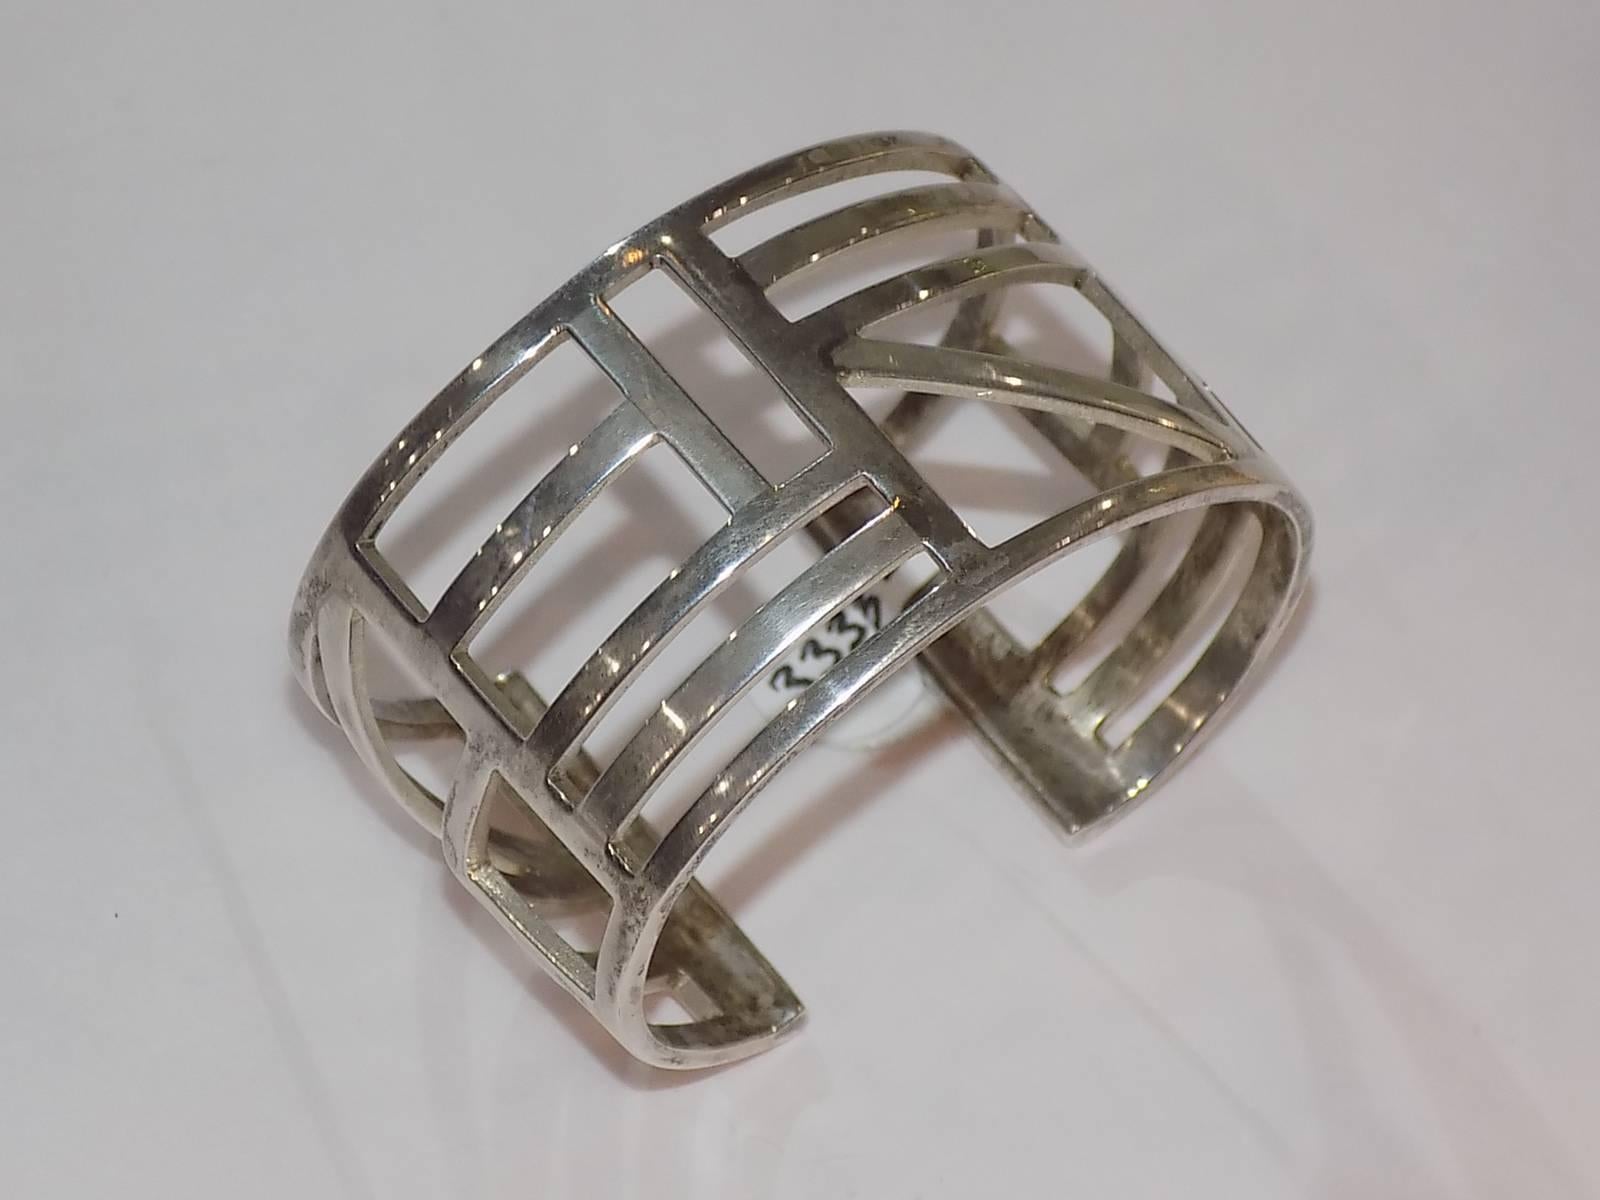 Solid Sterling Silver Art Deco Cuff Bracelet.
Hand-signed by artist. One of a kind. SIZE: 1 1/2" wide New Never worn